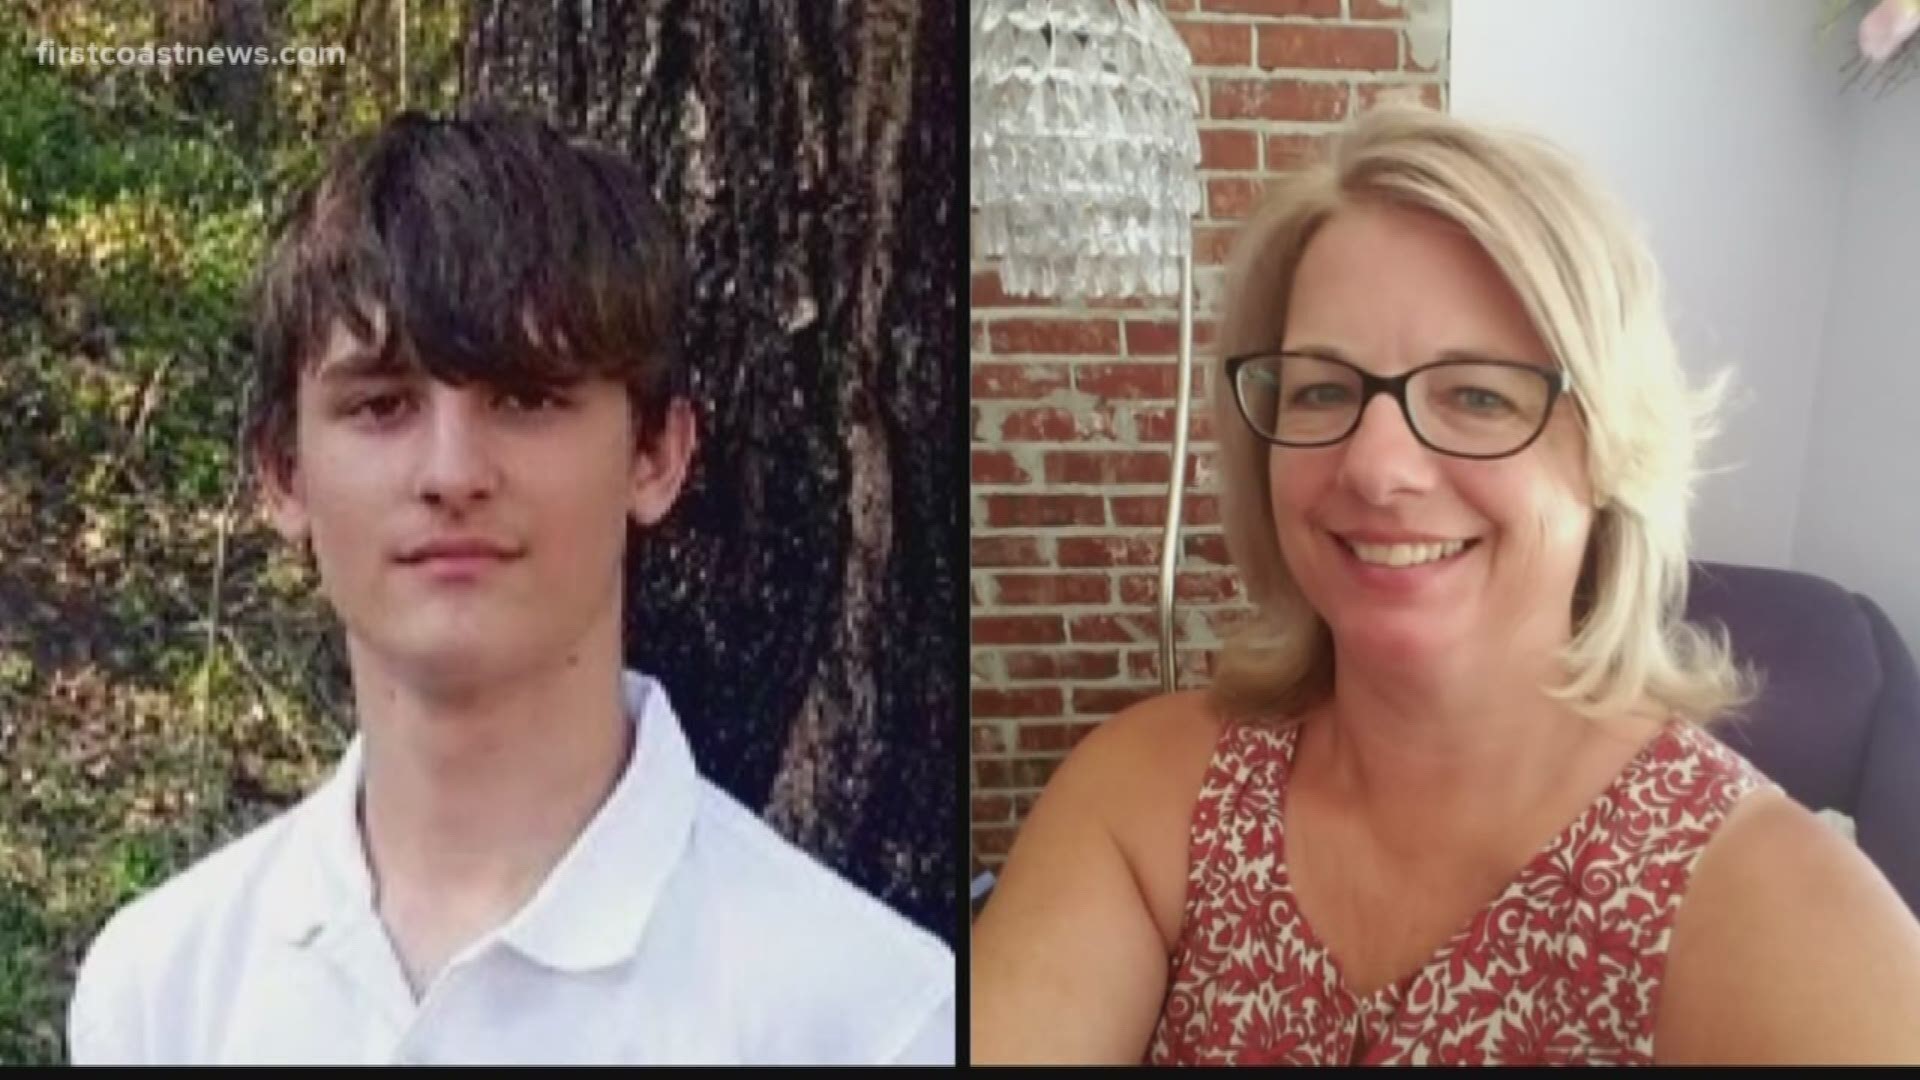 Logan Mott, 17, was sentenced to 15 years out of a possible 40-year sentence for the brutal killing of his 53-year-old grandmother, Kristina French. He was 15.